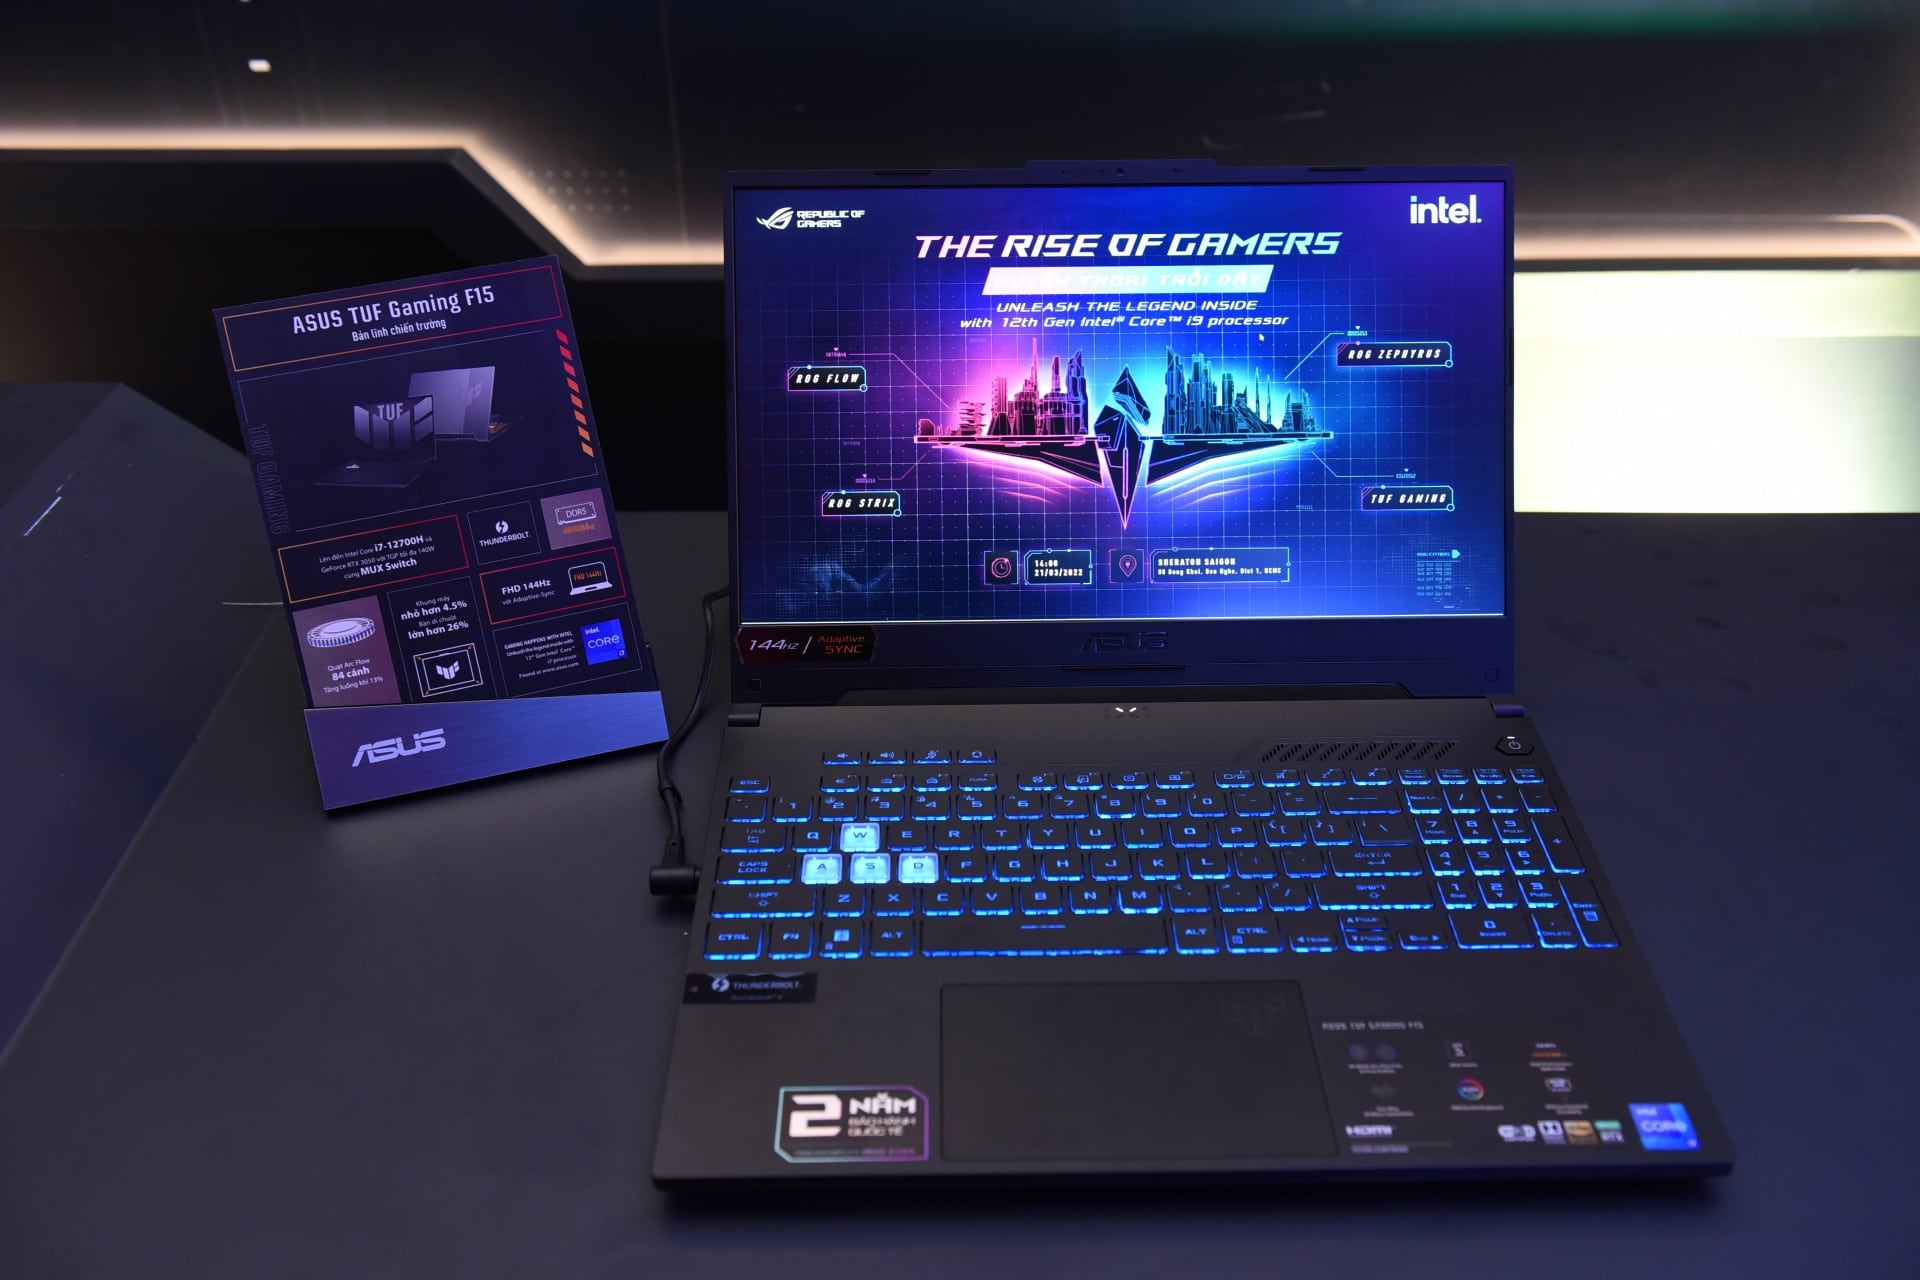 TCBC ASUS ROG khuay dao thi truong voi loat Laptop Gaming dinh dam su dung Intel the he 12 19 MMOSITE - Thông tin công nghệ, review, thủ thuật PC, gaming